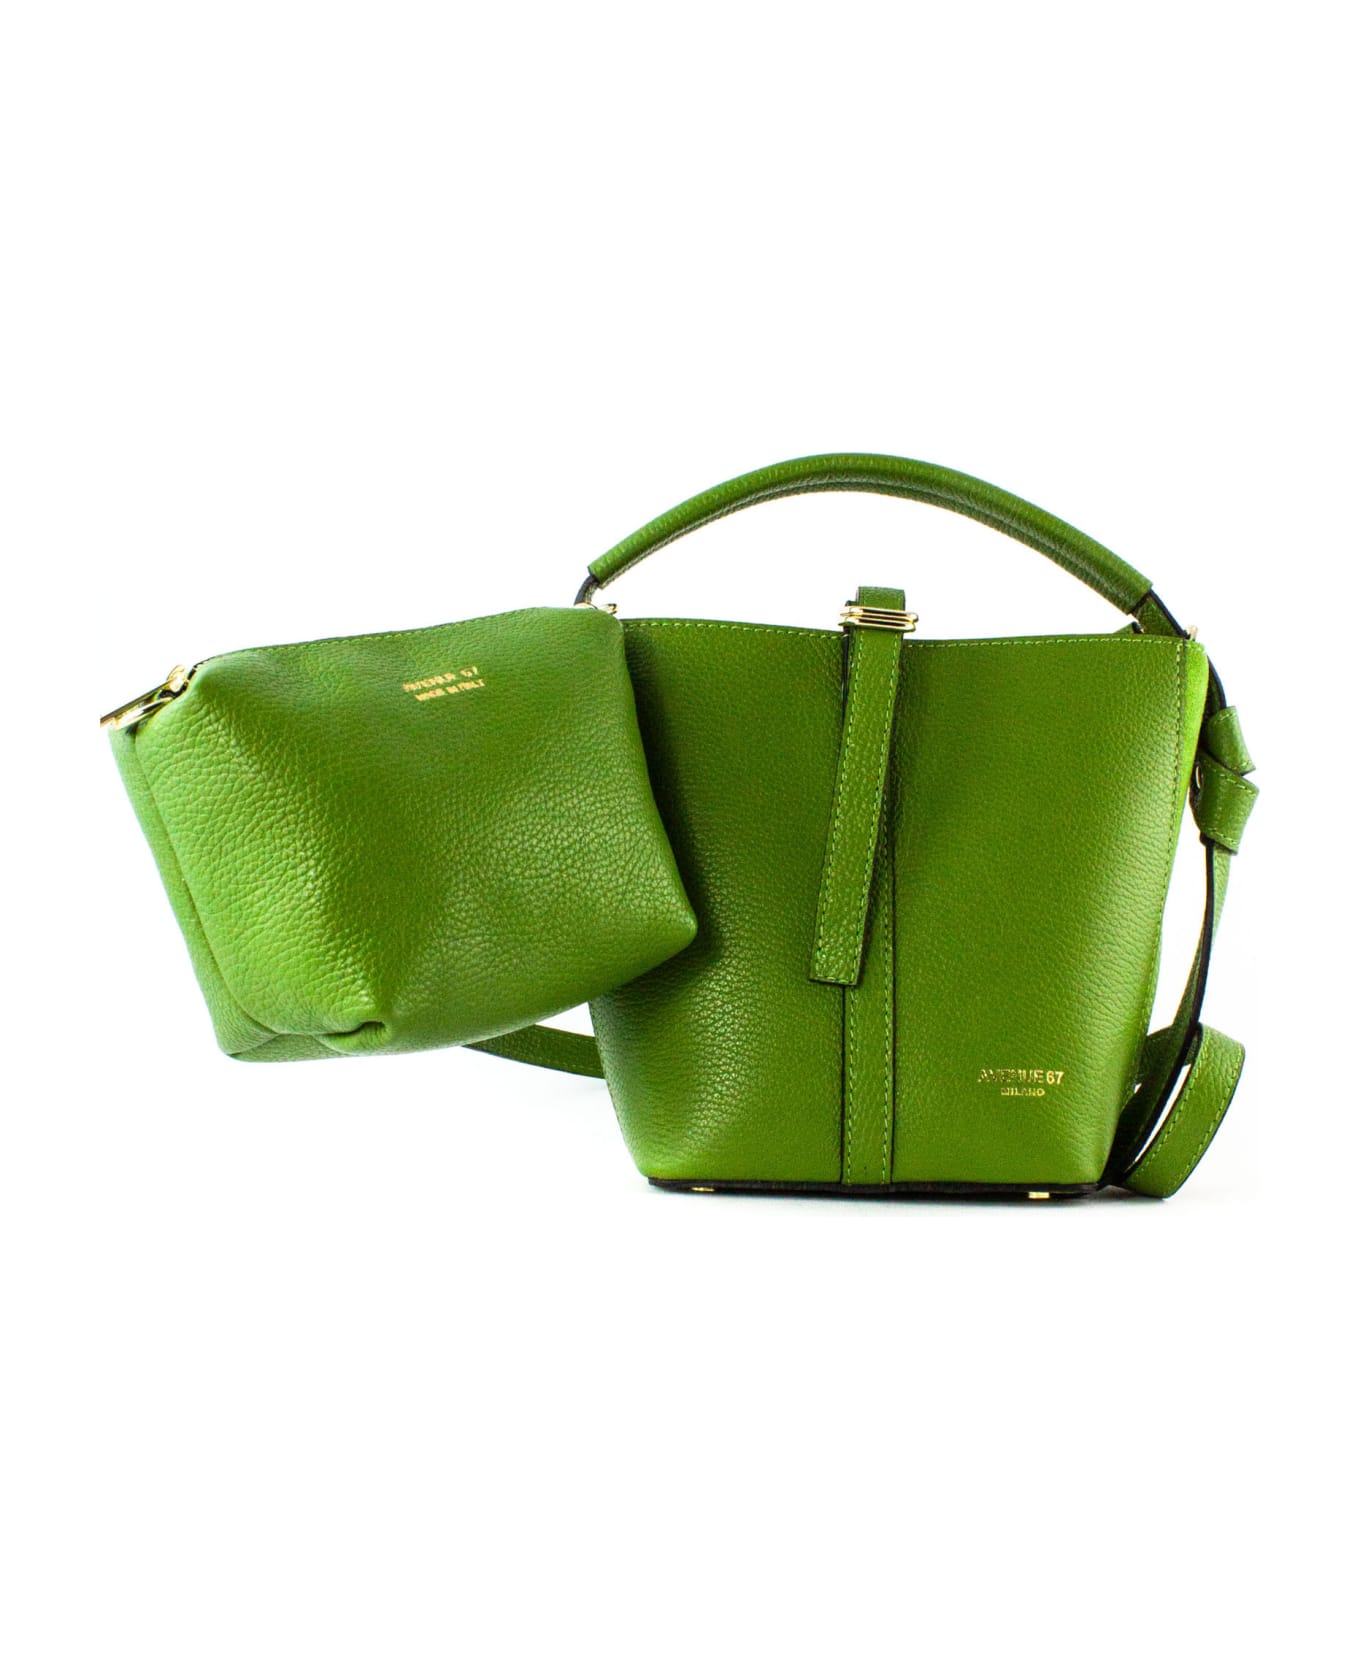 Avenue 67 Green Grained Leather Bag - Green トートバッグ